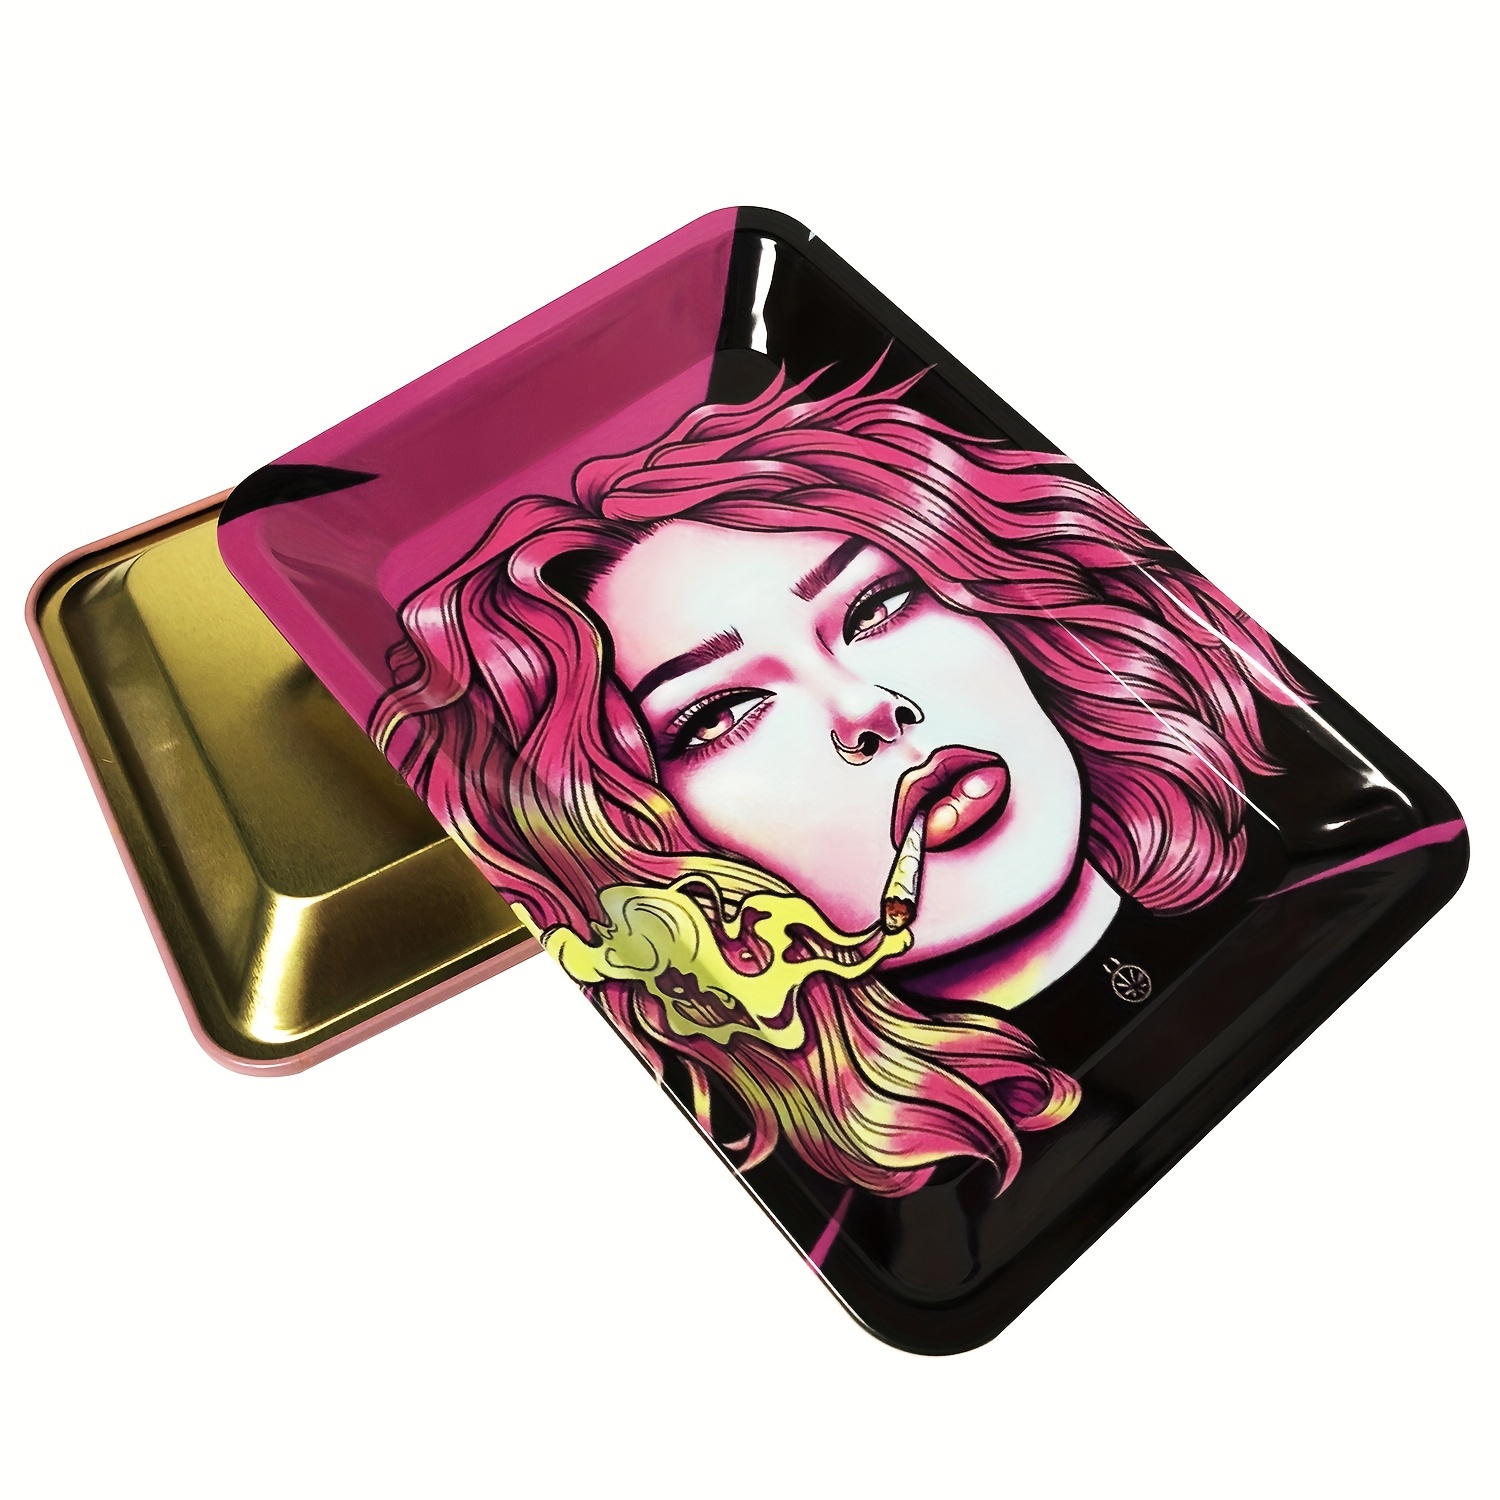 1pc, Metal Rolling Tray,Household Cigarette Tray, Fun And Cute Gift, Ideal  Accessory For Home Or Travel, Storage,Smoking Accessories